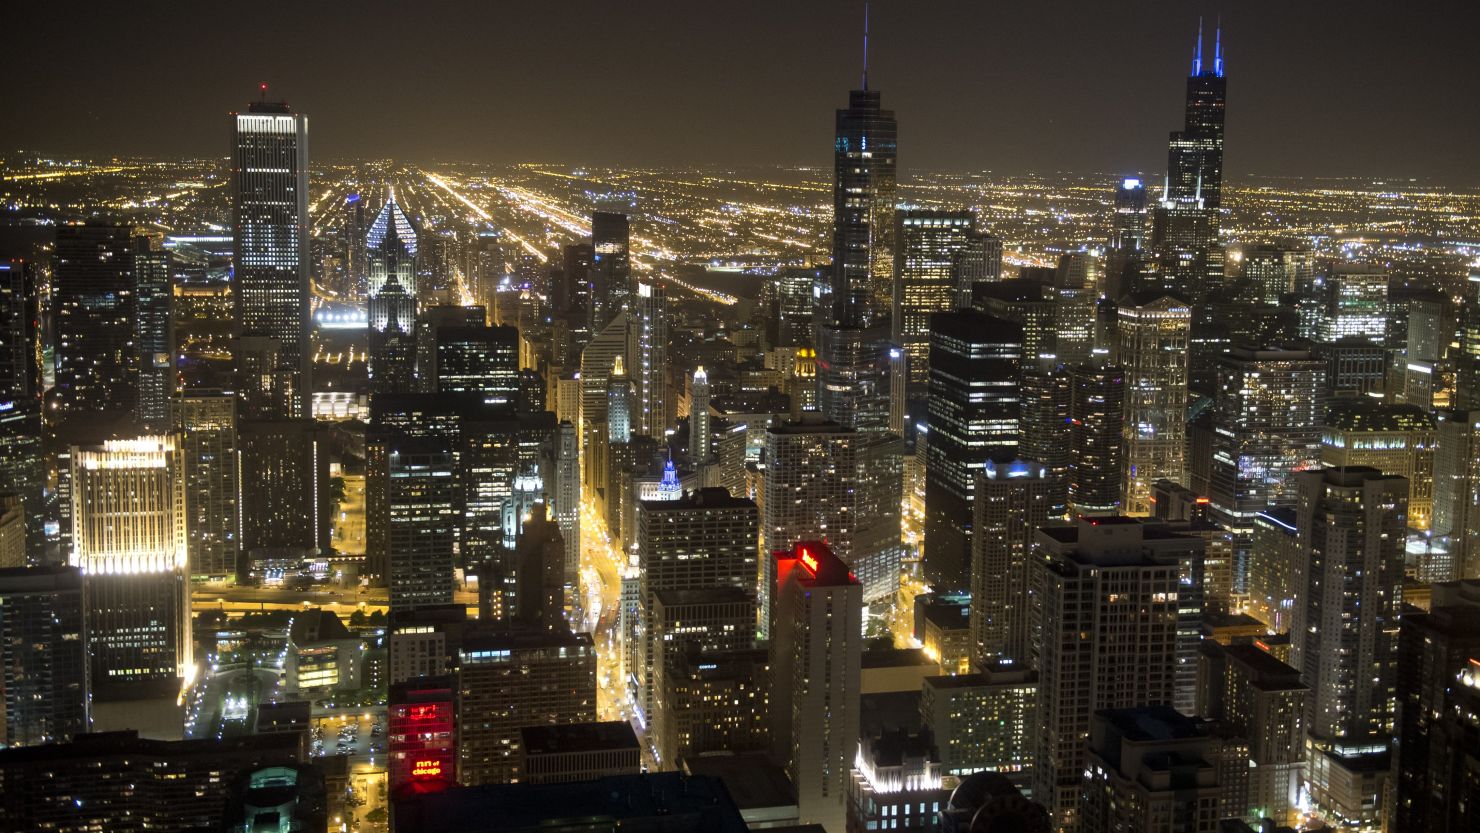 Downtown Chicago is one of the urban areas that is seeing an increase in population, writes David Frum.